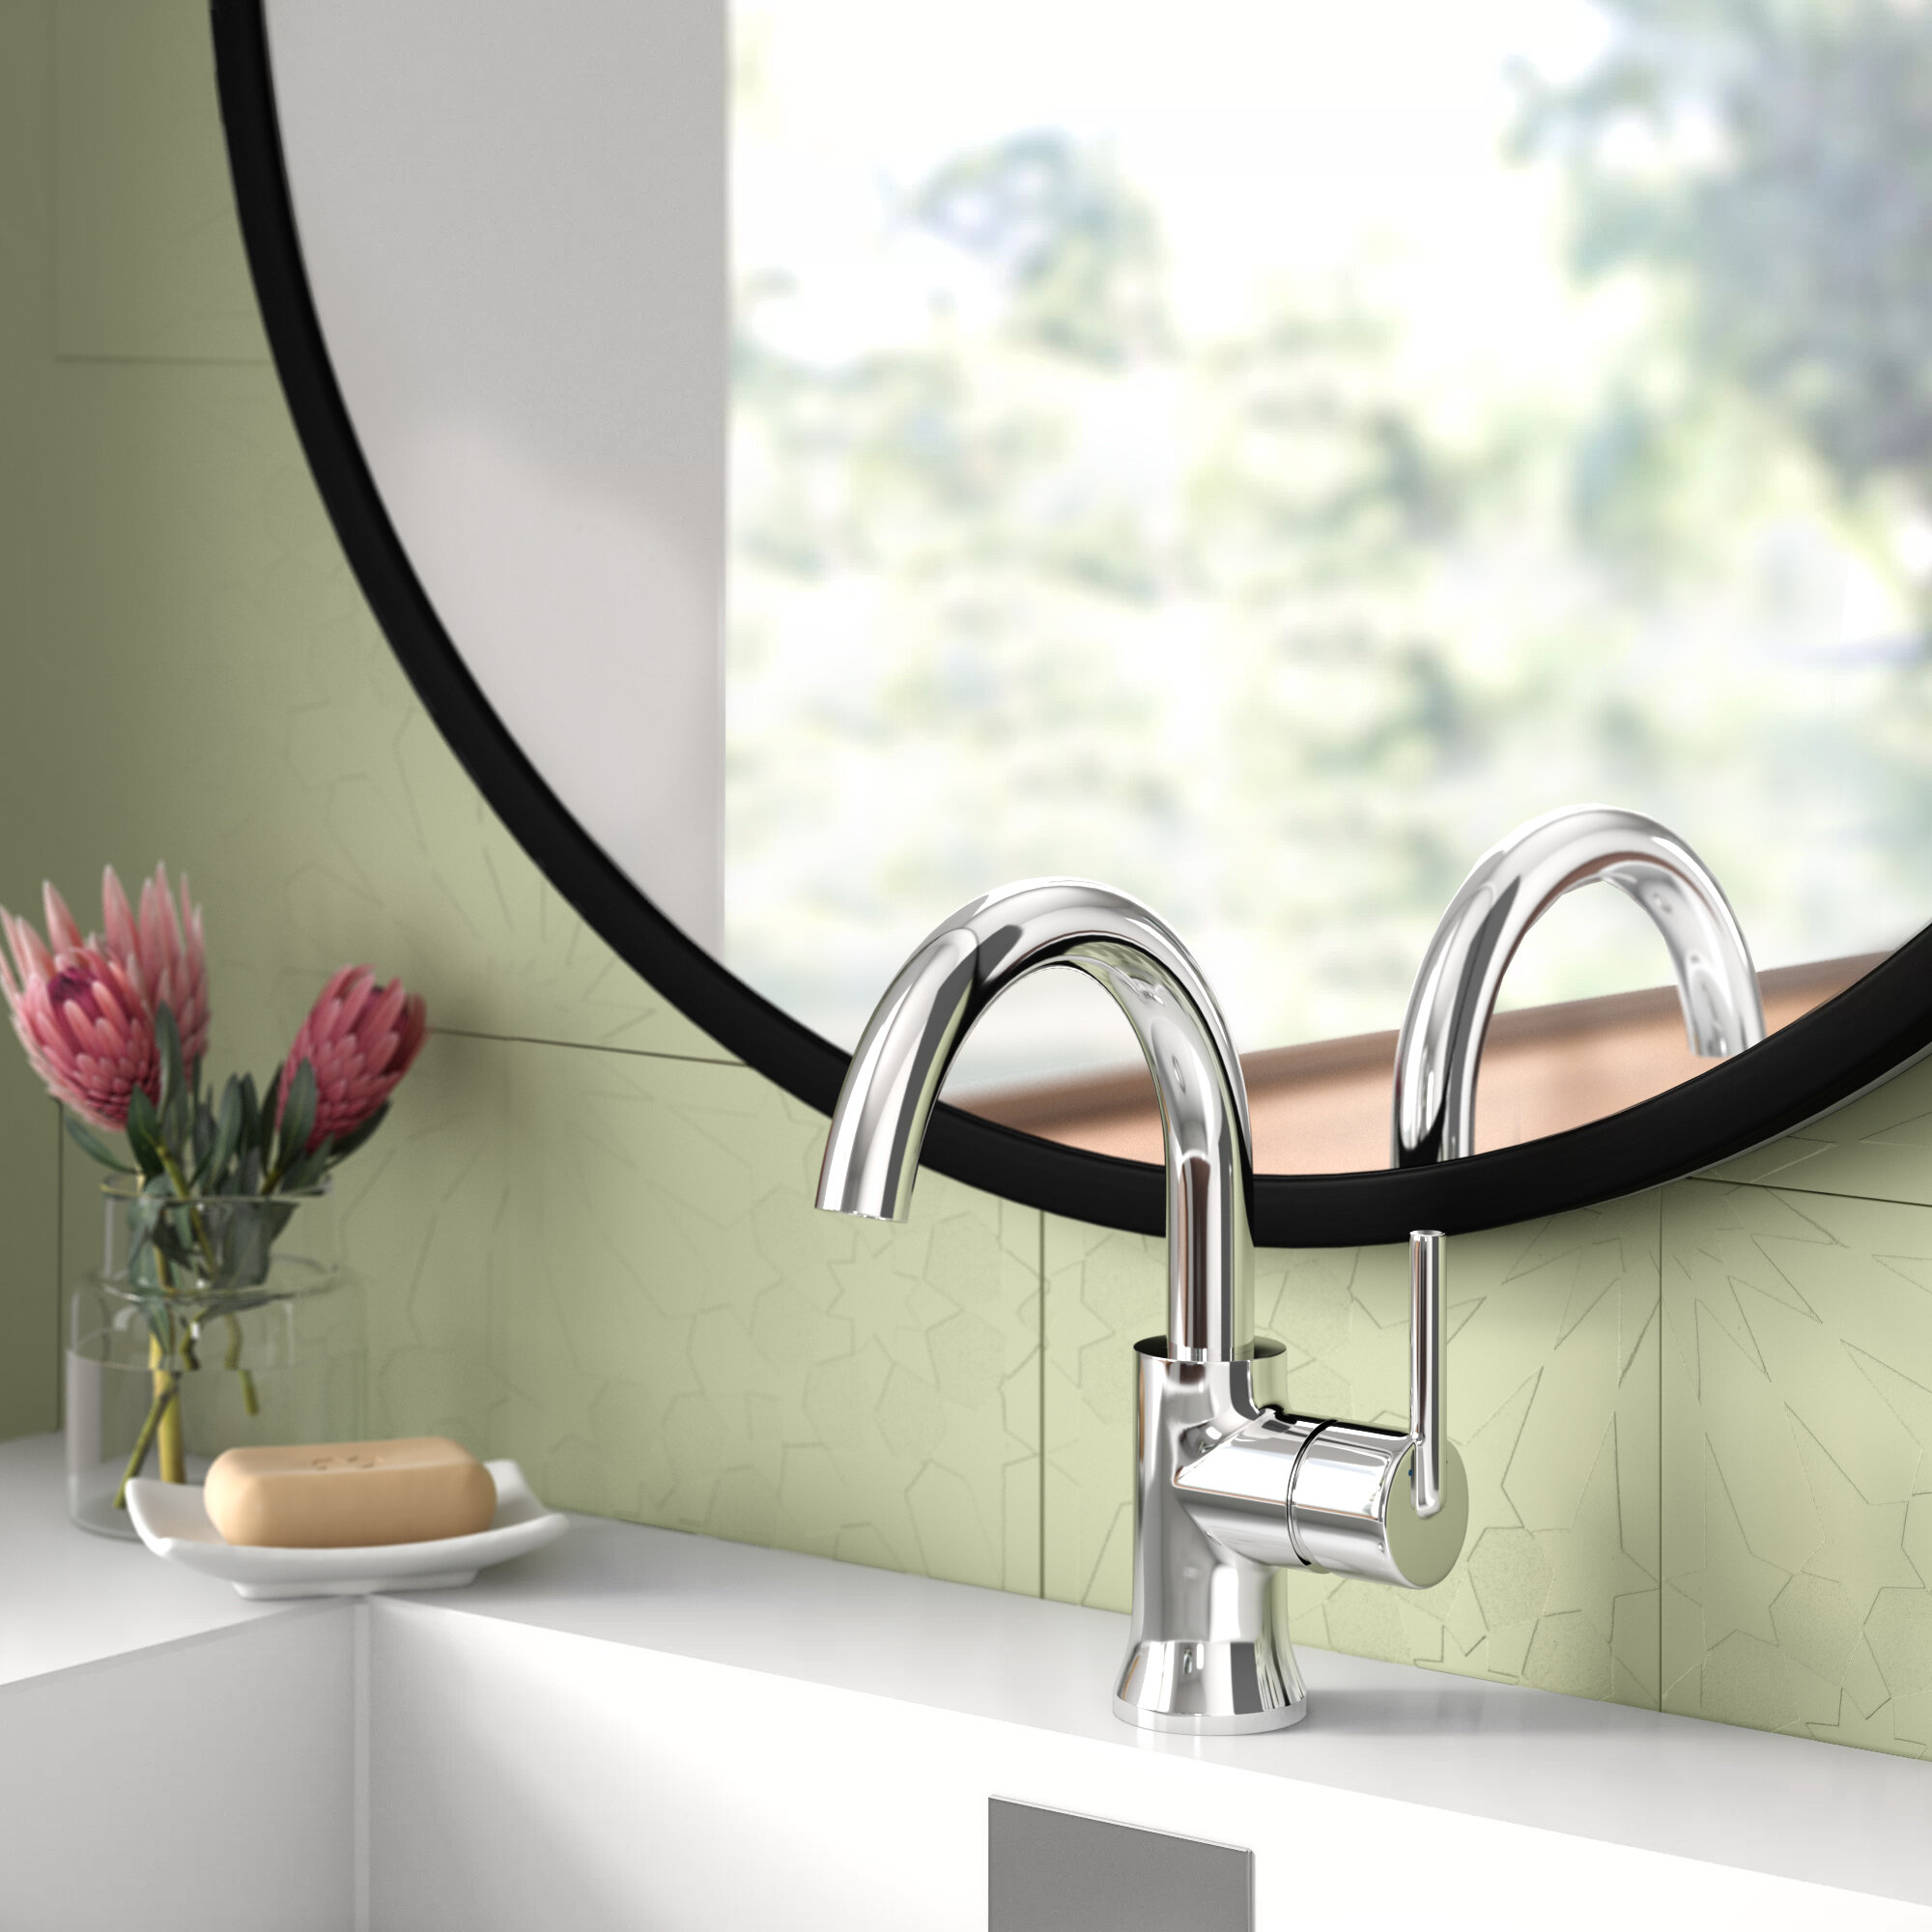 Trinsic Single Hole Bathroom Faucet With Drain Assembly And Diamond Seal Technology Reviews Allmodern